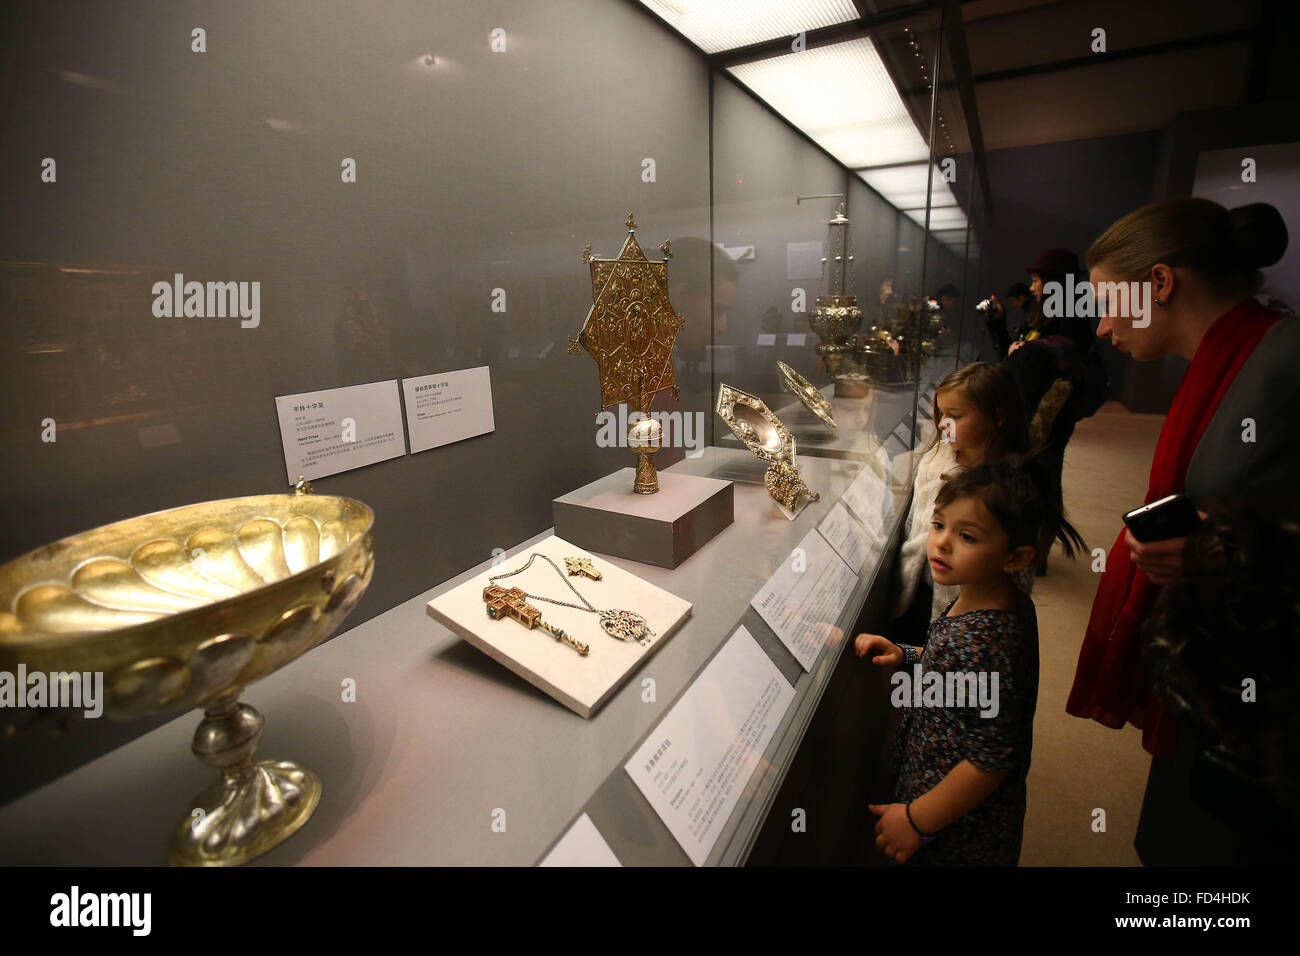 (160128) -- BEIJING, Jan. 28, 2016 (Xinhua) -- People visit the exhibition 'Treasures of Romania' at National Museum of China in Beijing, capital of China, on Jan. 28, 2016. The three-month exhibition opened here Thursday, showcasing Romania's history from the pre-historical period to the end of the 18th century with 445 pieces (sets) of exhibits. (Xinhua/Lu Xu) (yjc) Stock Photo